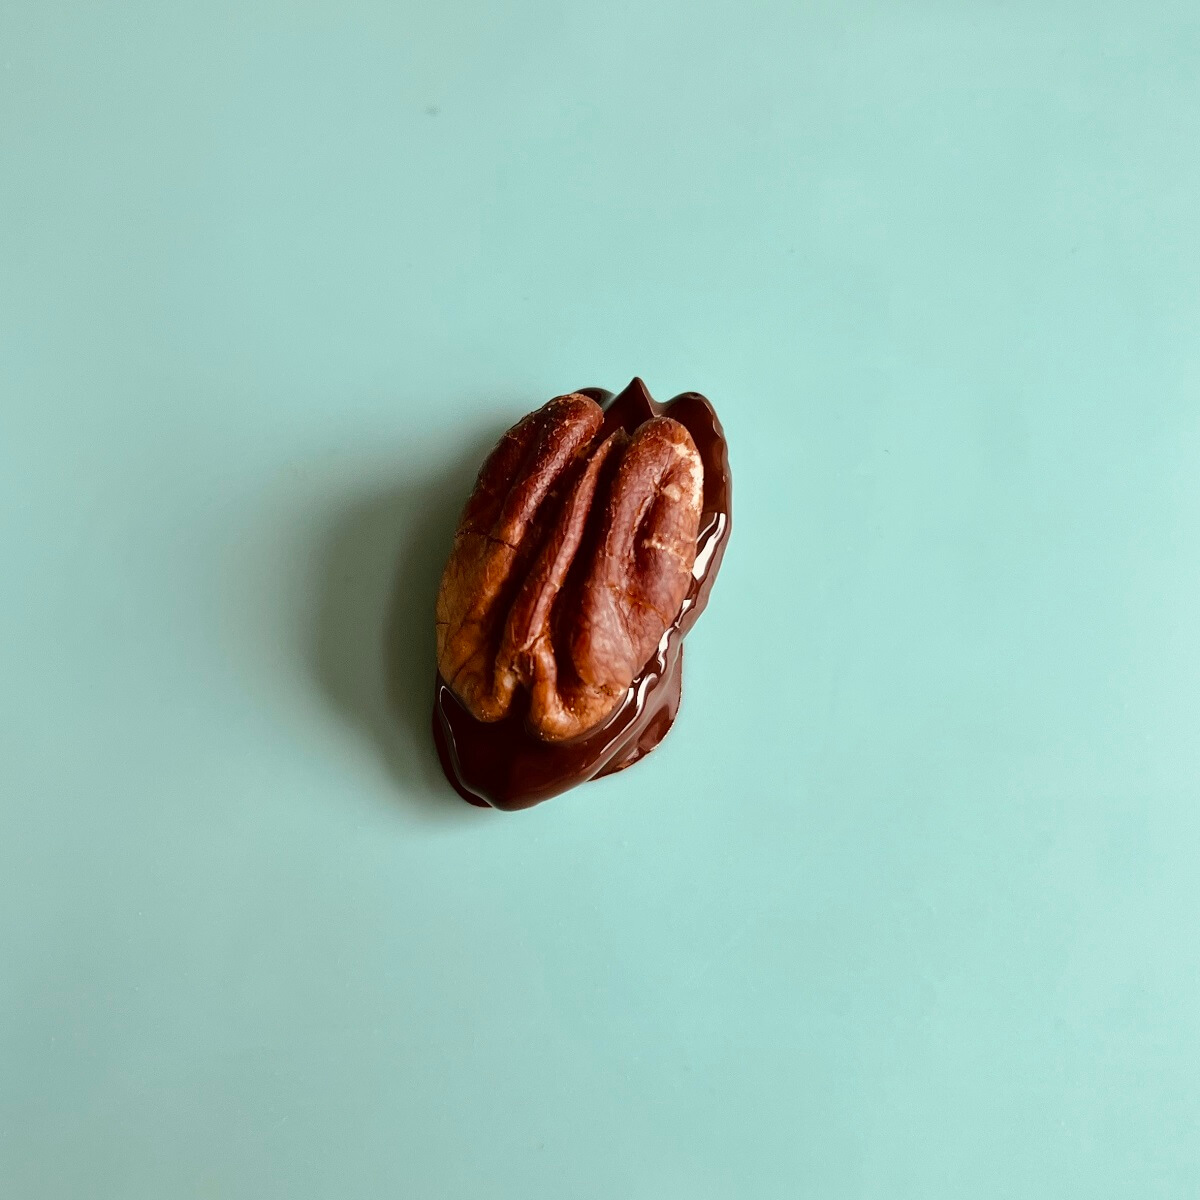 A chocolate covered pecan on a silicone baking mat.